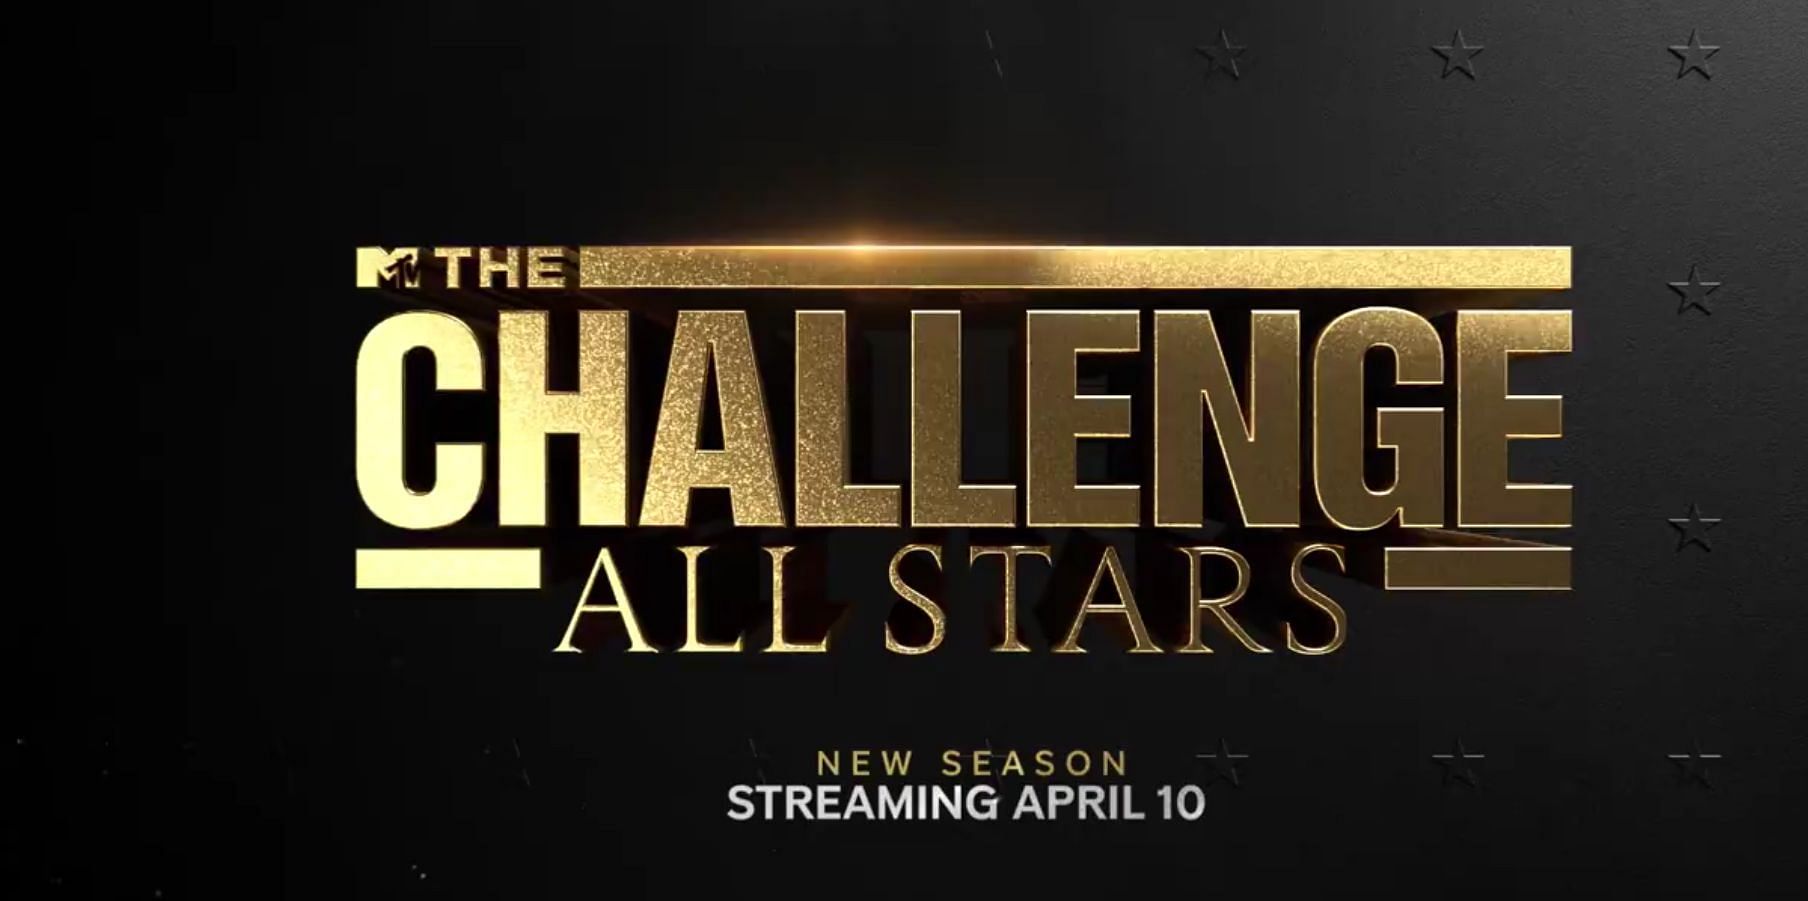 The Challenge: All Stars returns for Season 4 in April (Image: The Challenge on X).